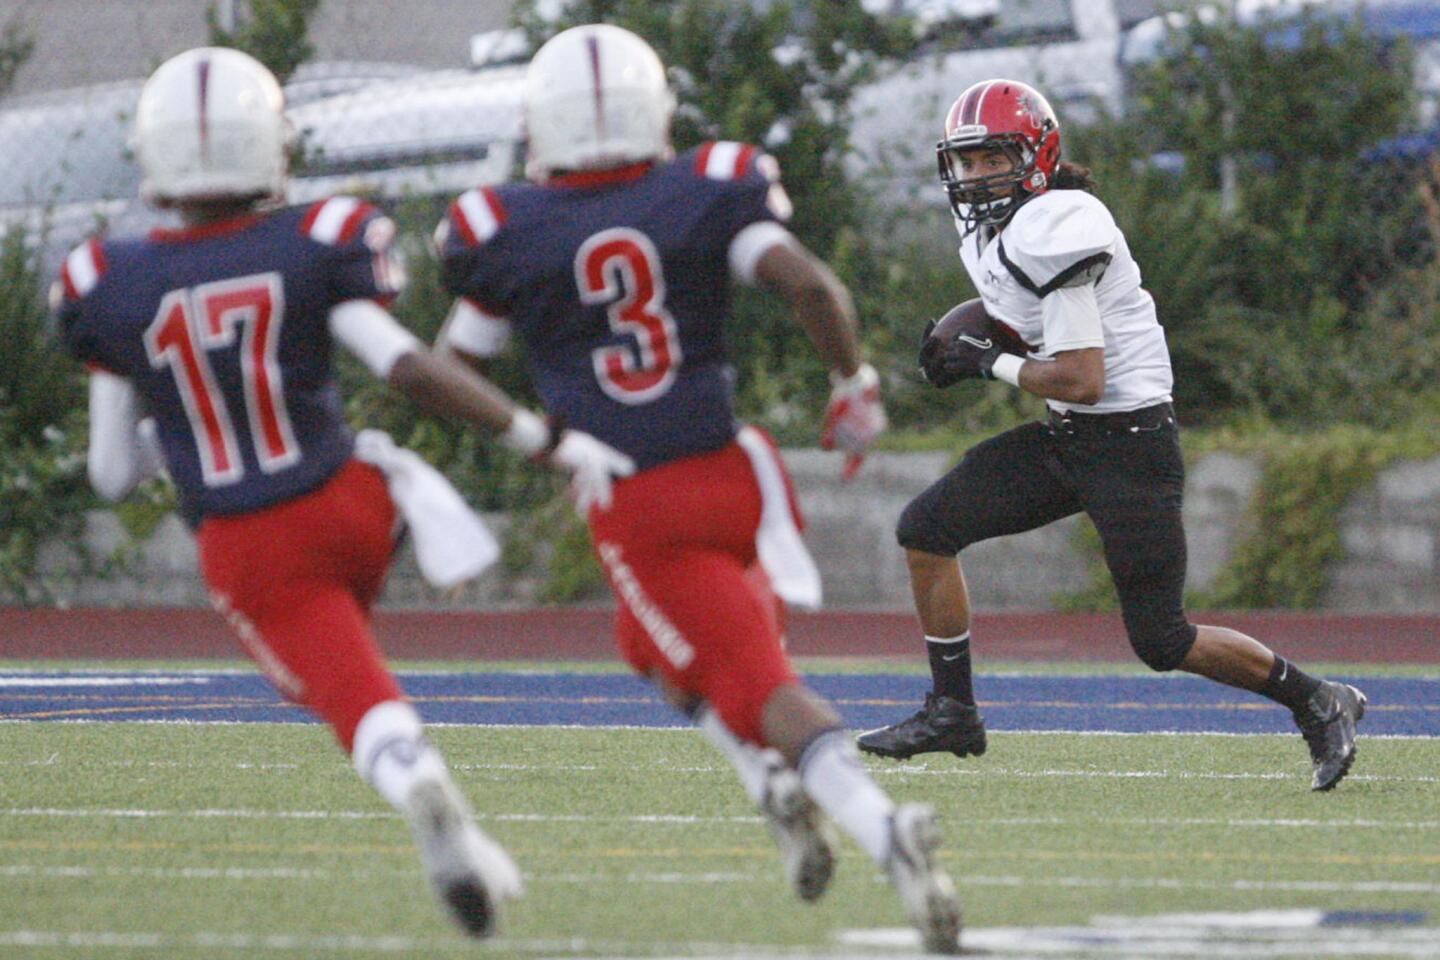 Glendale's Christian Osorio, right, runs with the ball during a game against La Salle at La Salle High School in Pasadena on Friday, on August 31, 2012.